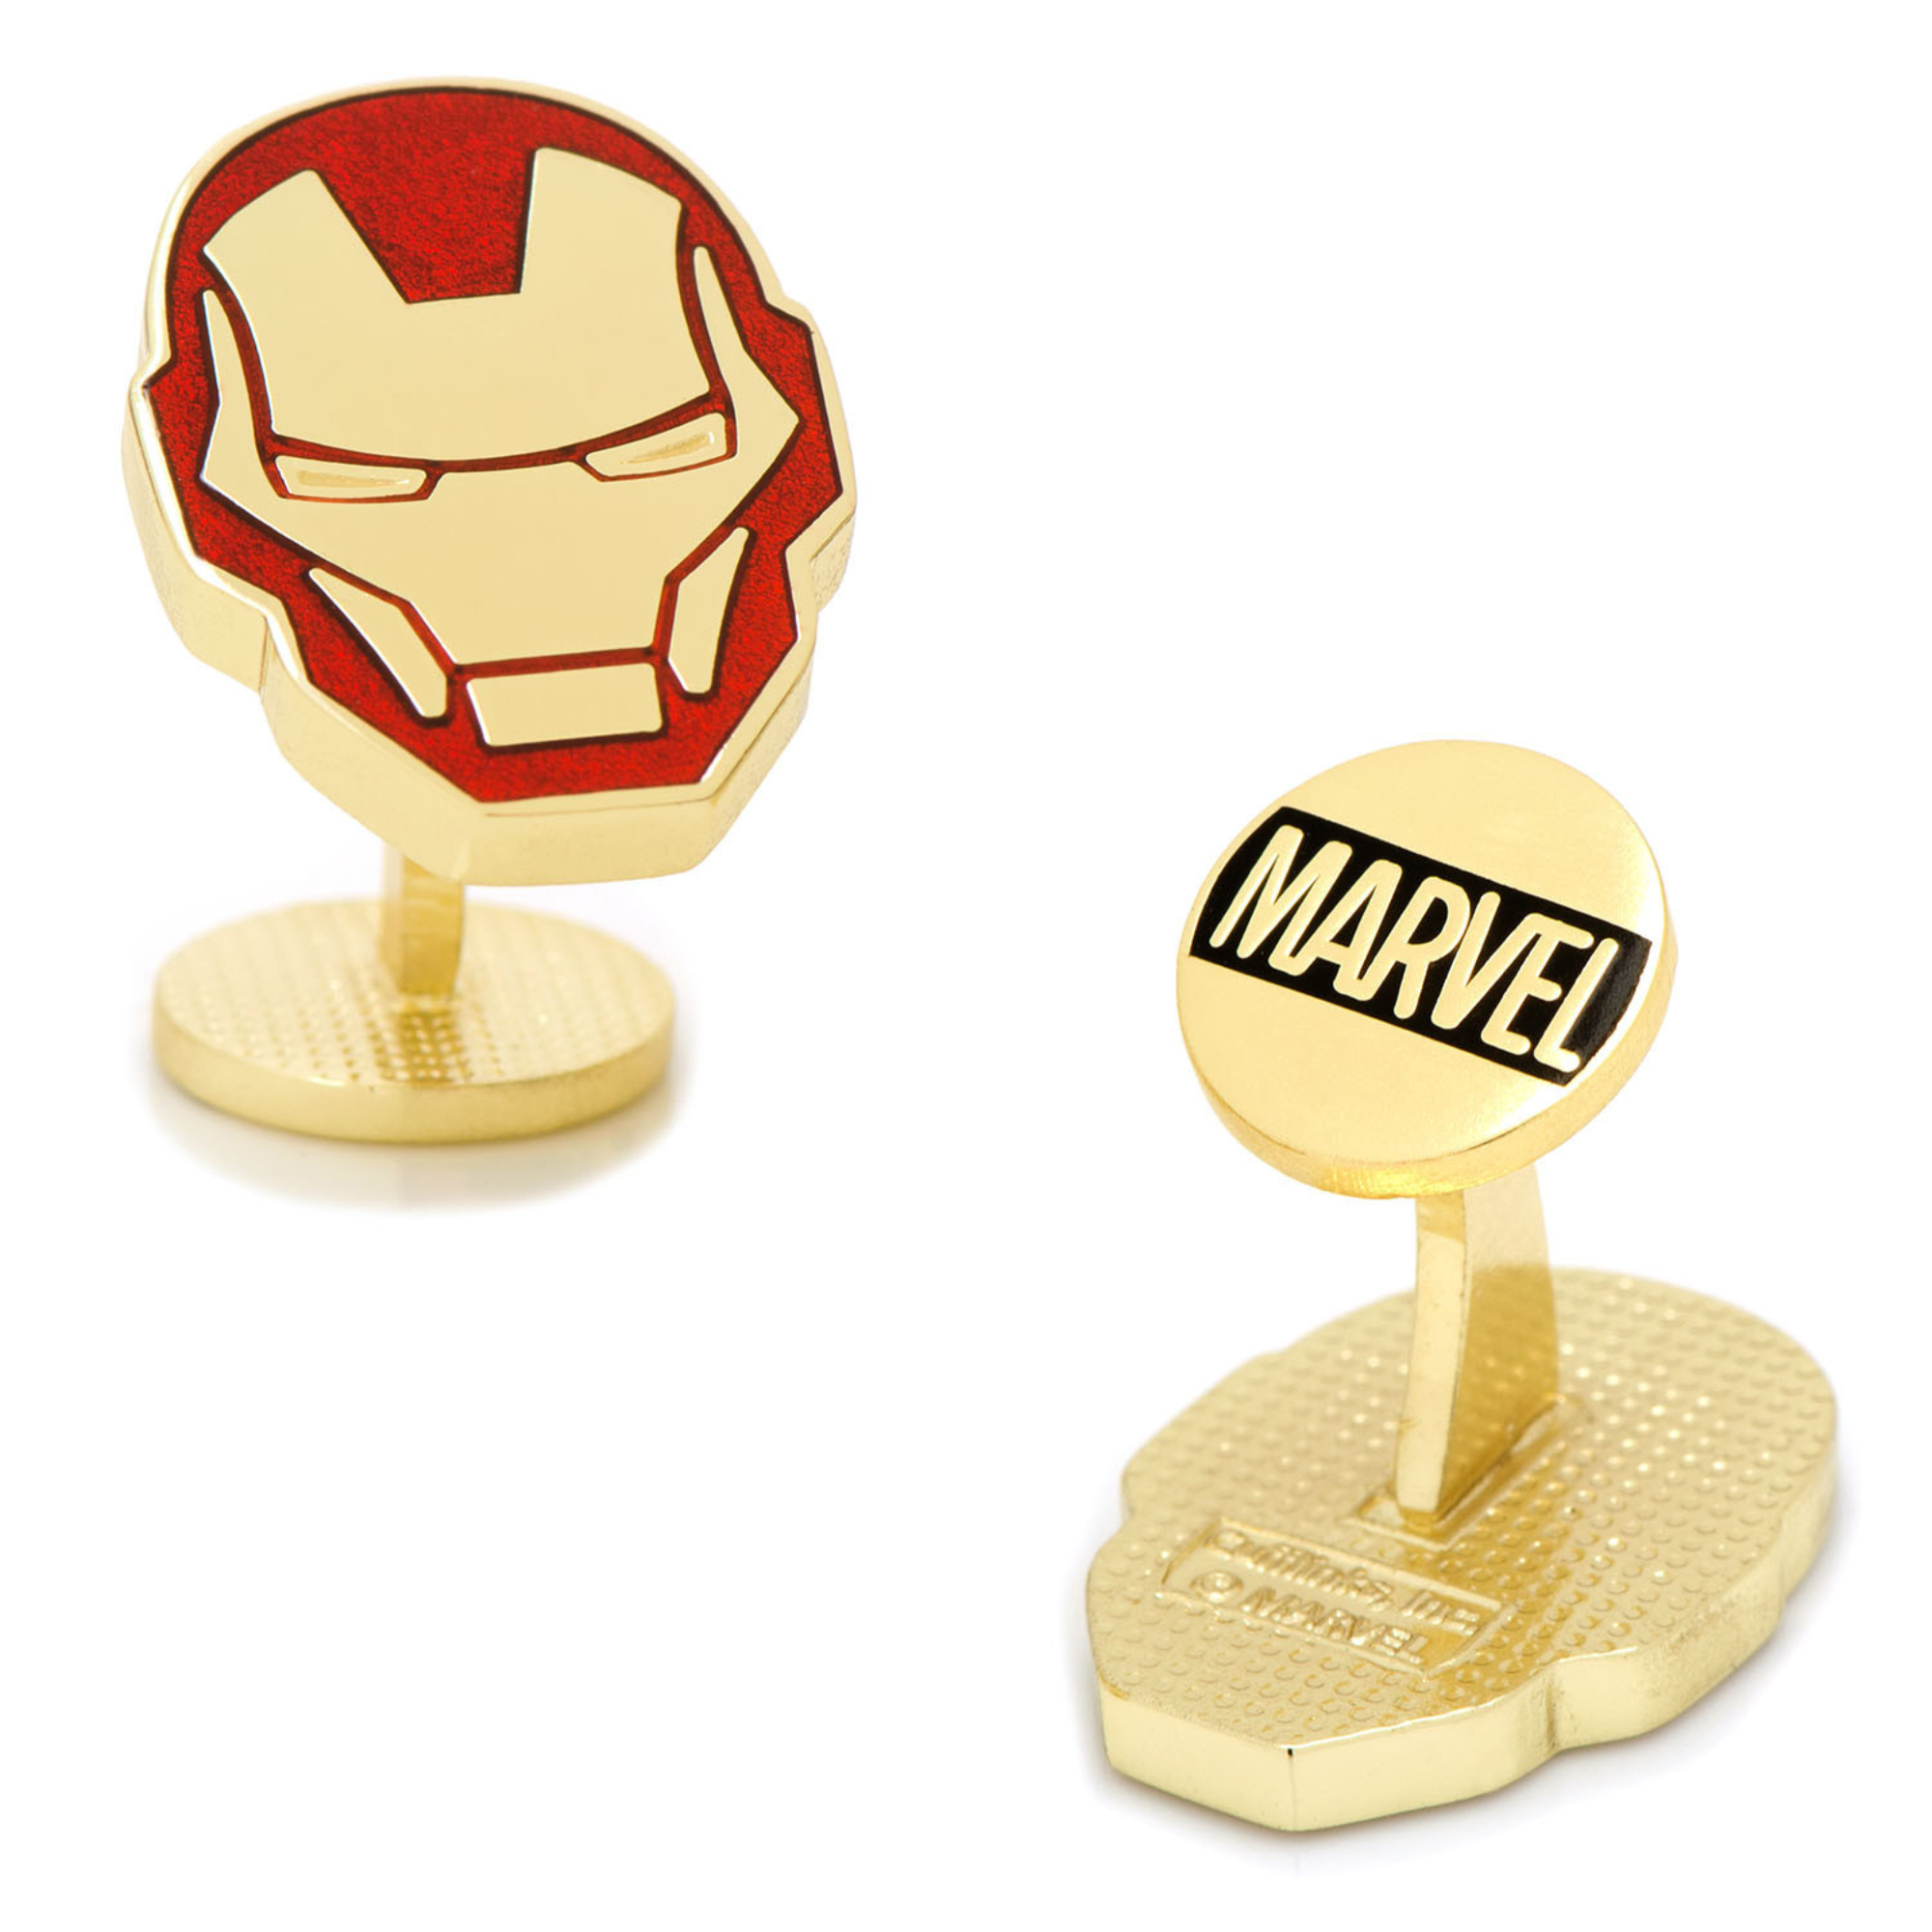 Iron Man Helmet Cufflinks in Red and Gold